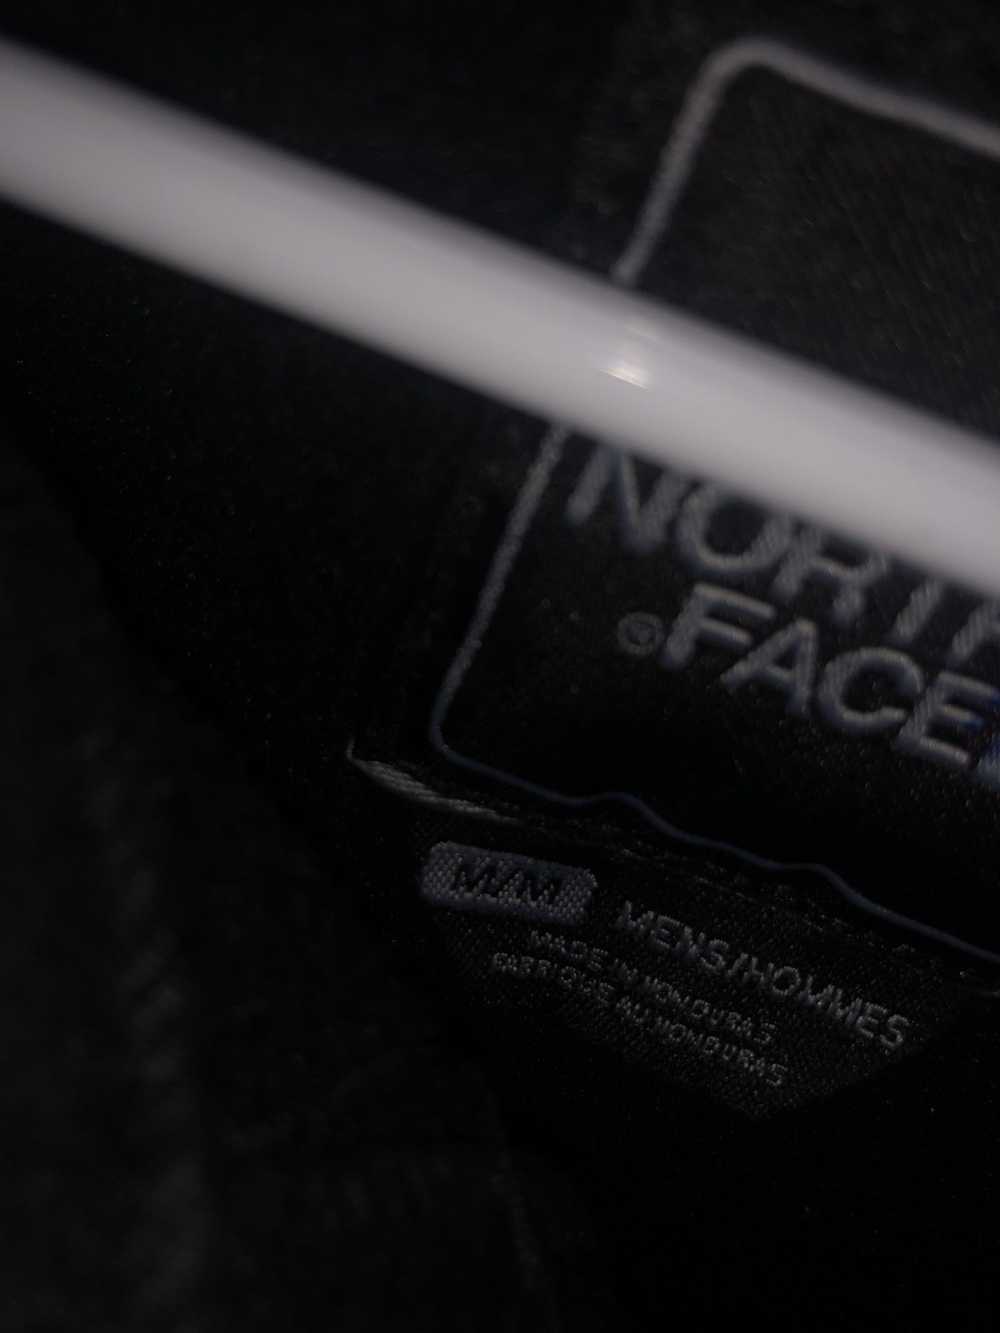 The North Face North face fleece - image 3